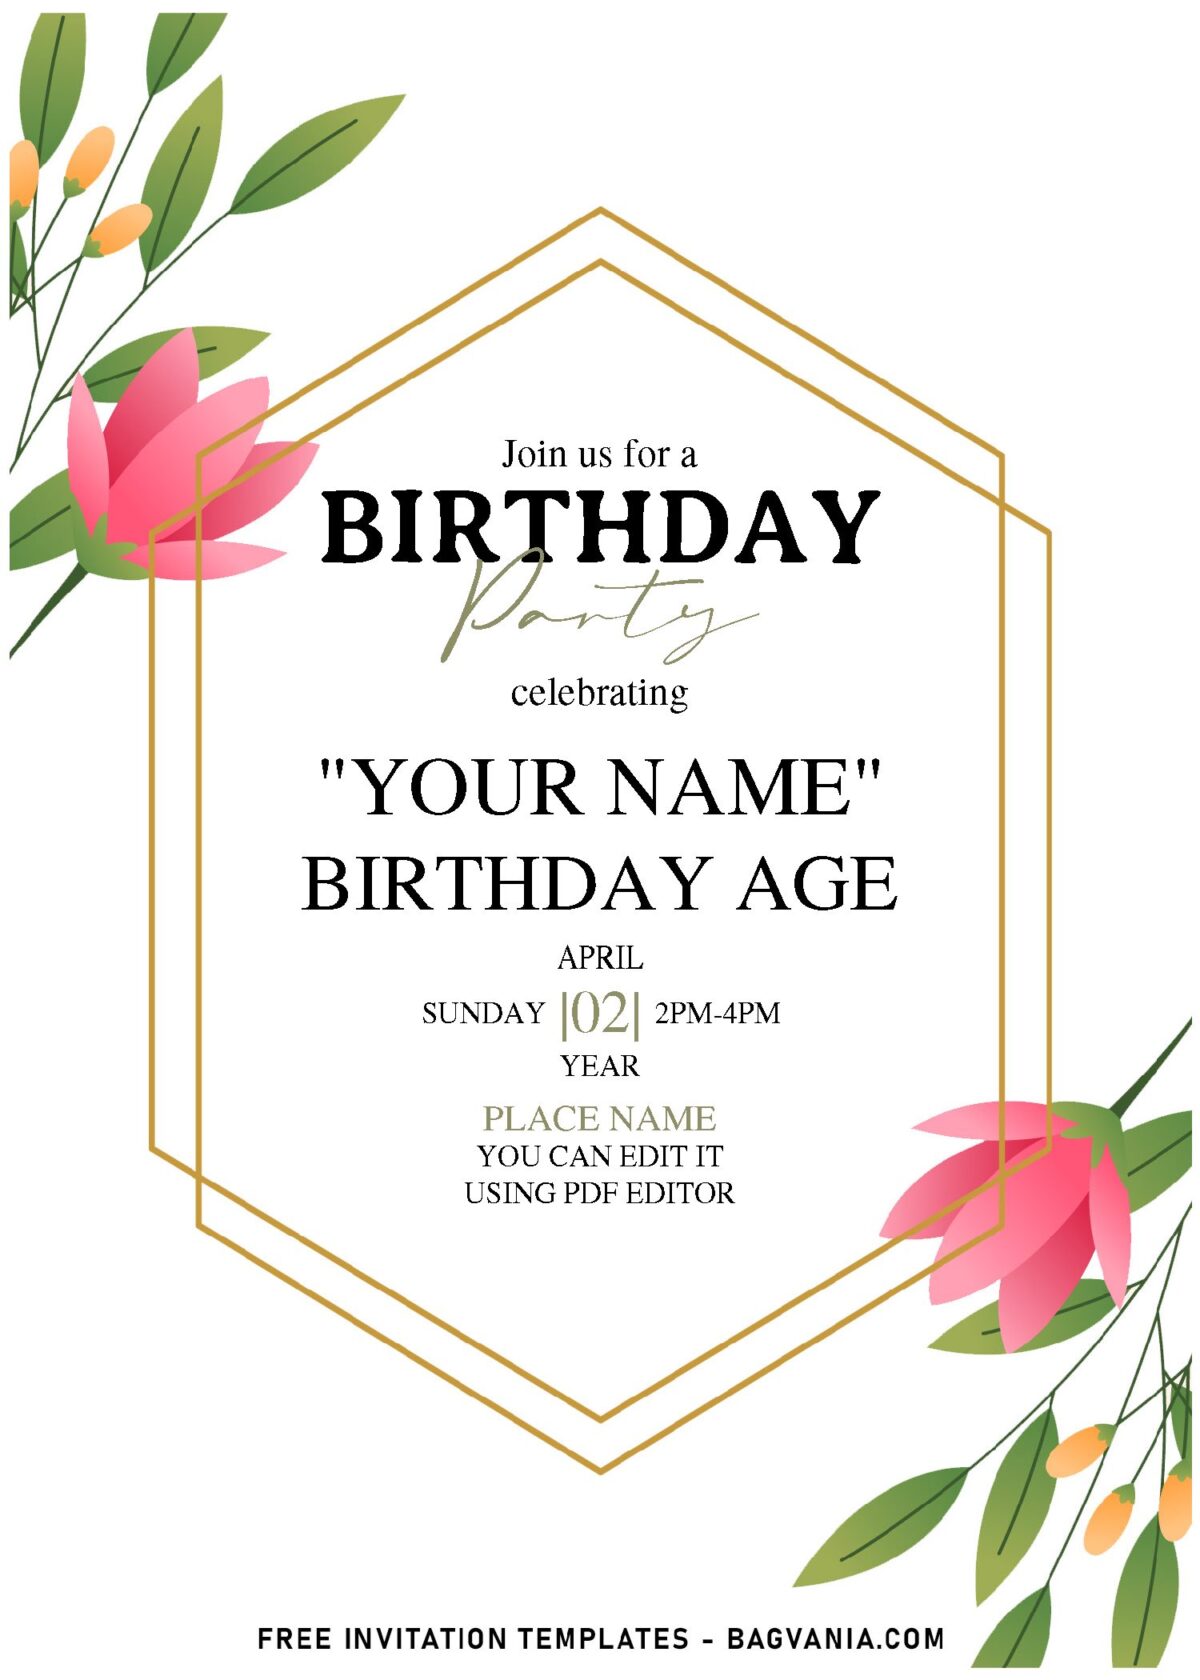 (Free Editable PDF) Geometric Gold And Floral Perfection Birthday Invitation Templates with simple white background